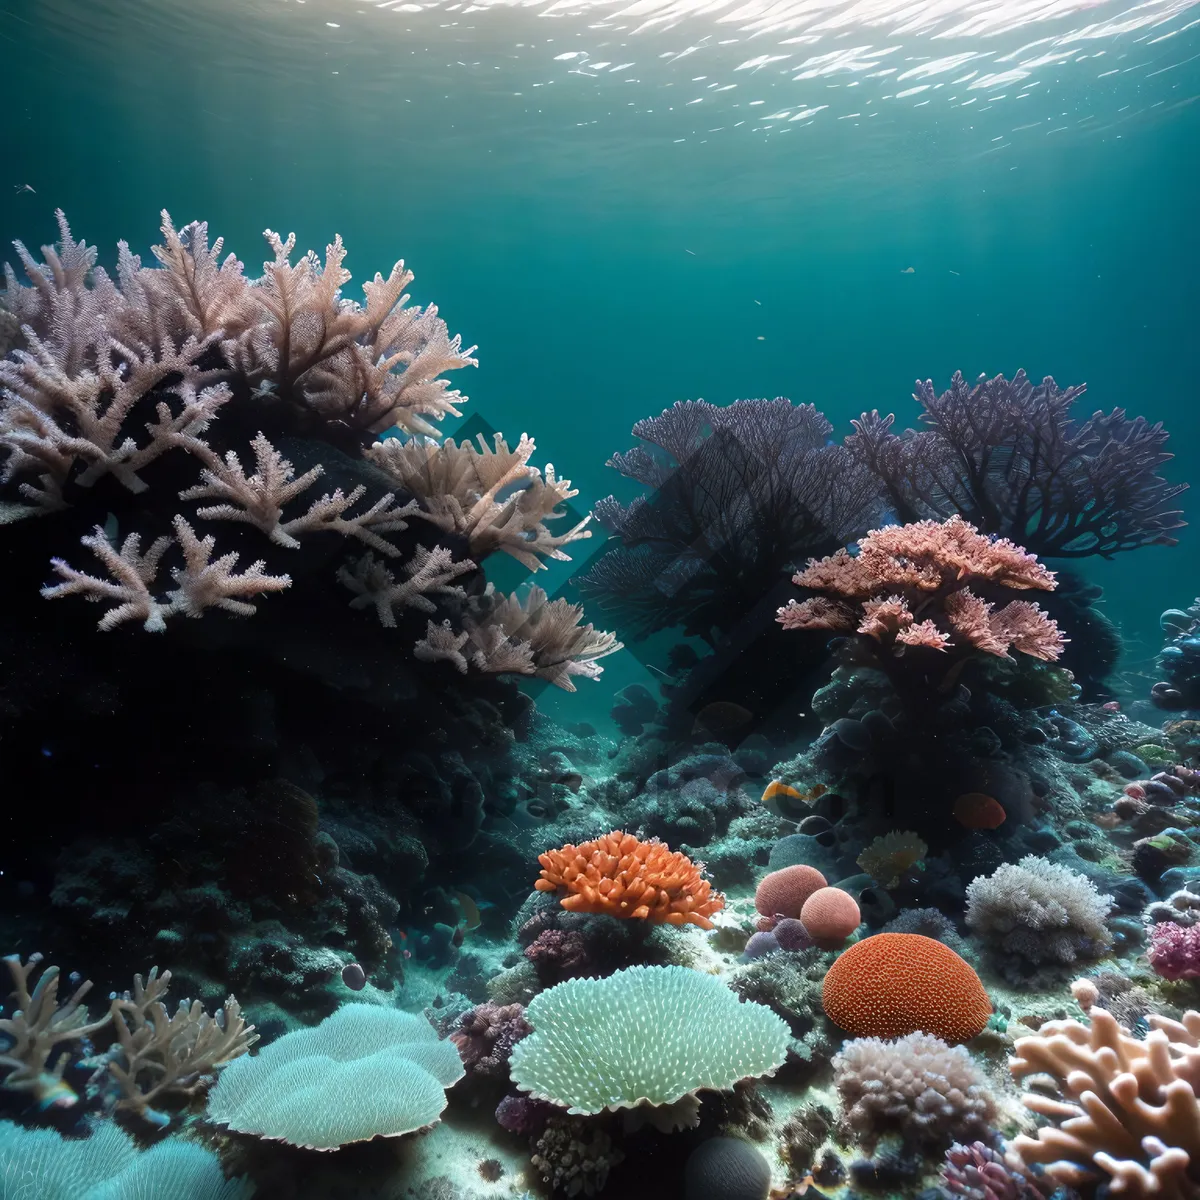 Picture of Colorful Coral Reef: A Vibrant Underwater Marine Paradise